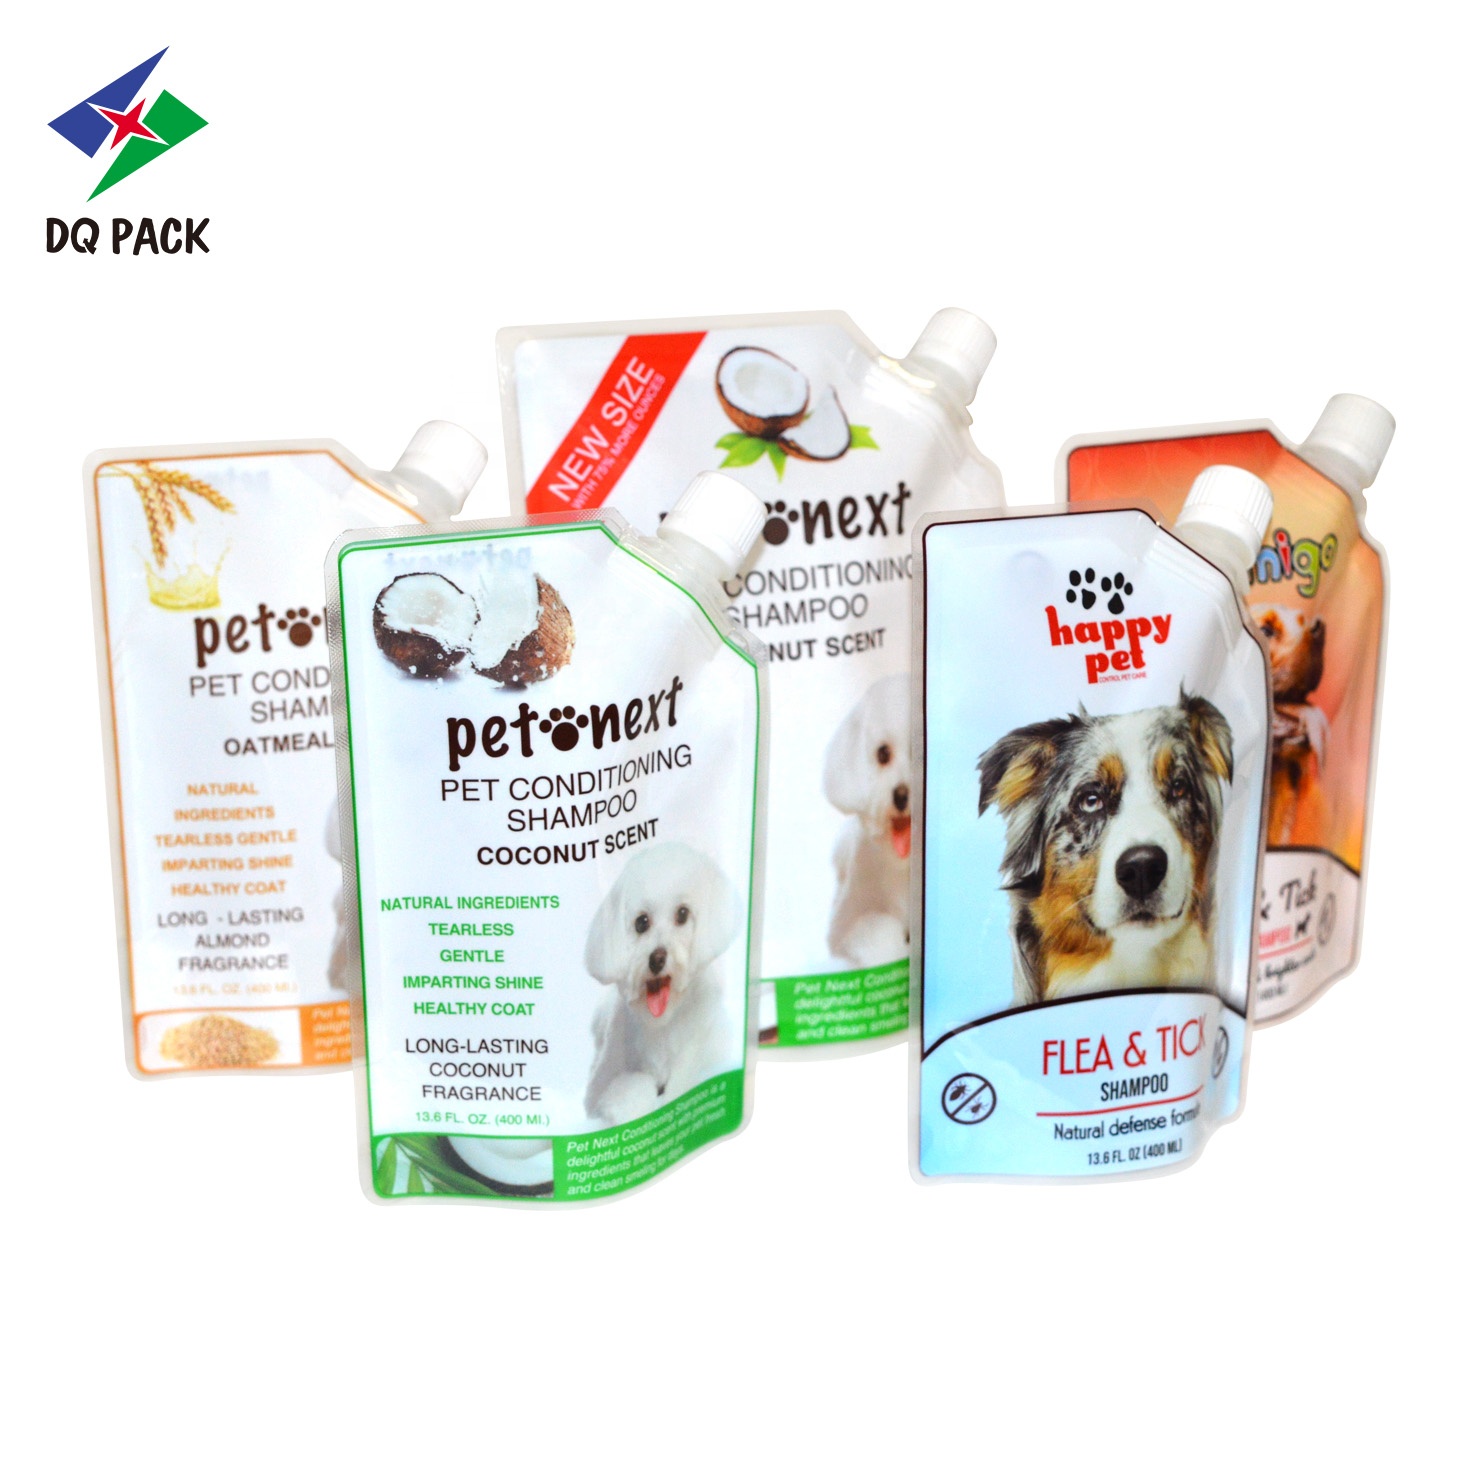 DQ PACK Custom Printed Pet Shampoo Nozzle Pouch NY Stand Up Spout Bag